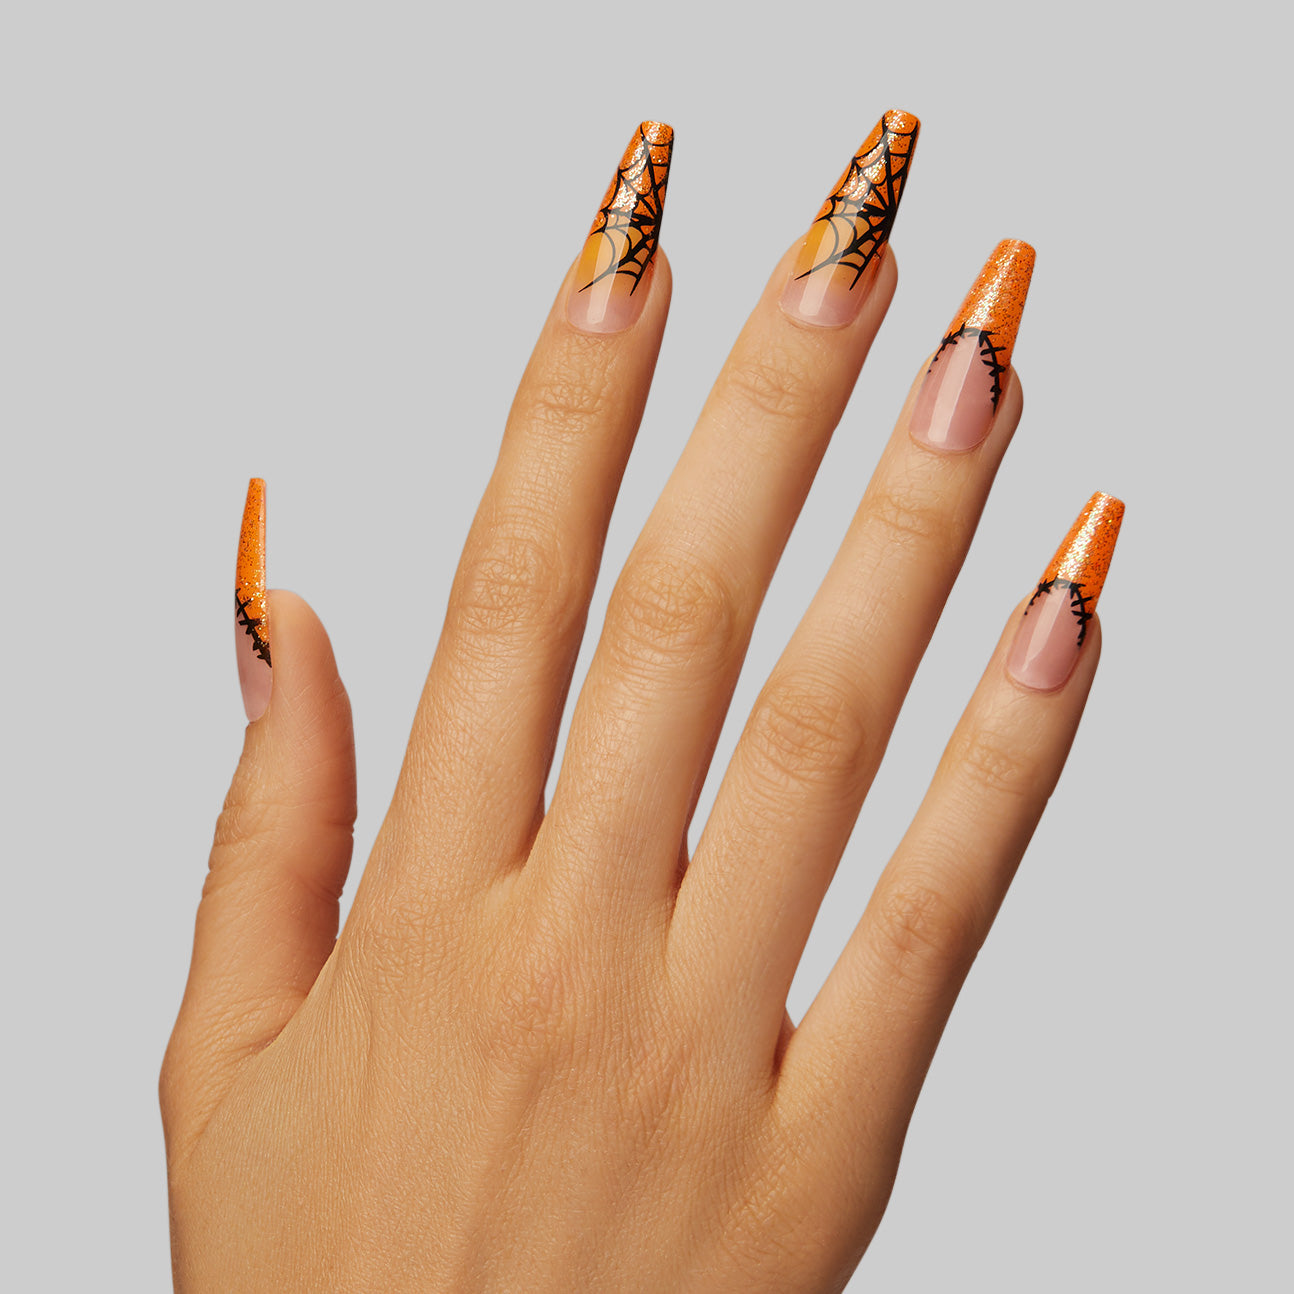  Nails that'll have them wrapped around your finger and tangled in your web by midnight. Extra long length, coffin shape, glossy finish. Sheer nude glue-on gel nails featuring bright orange french tips with stitching details, iridescent glitter, and spiderweb accents.